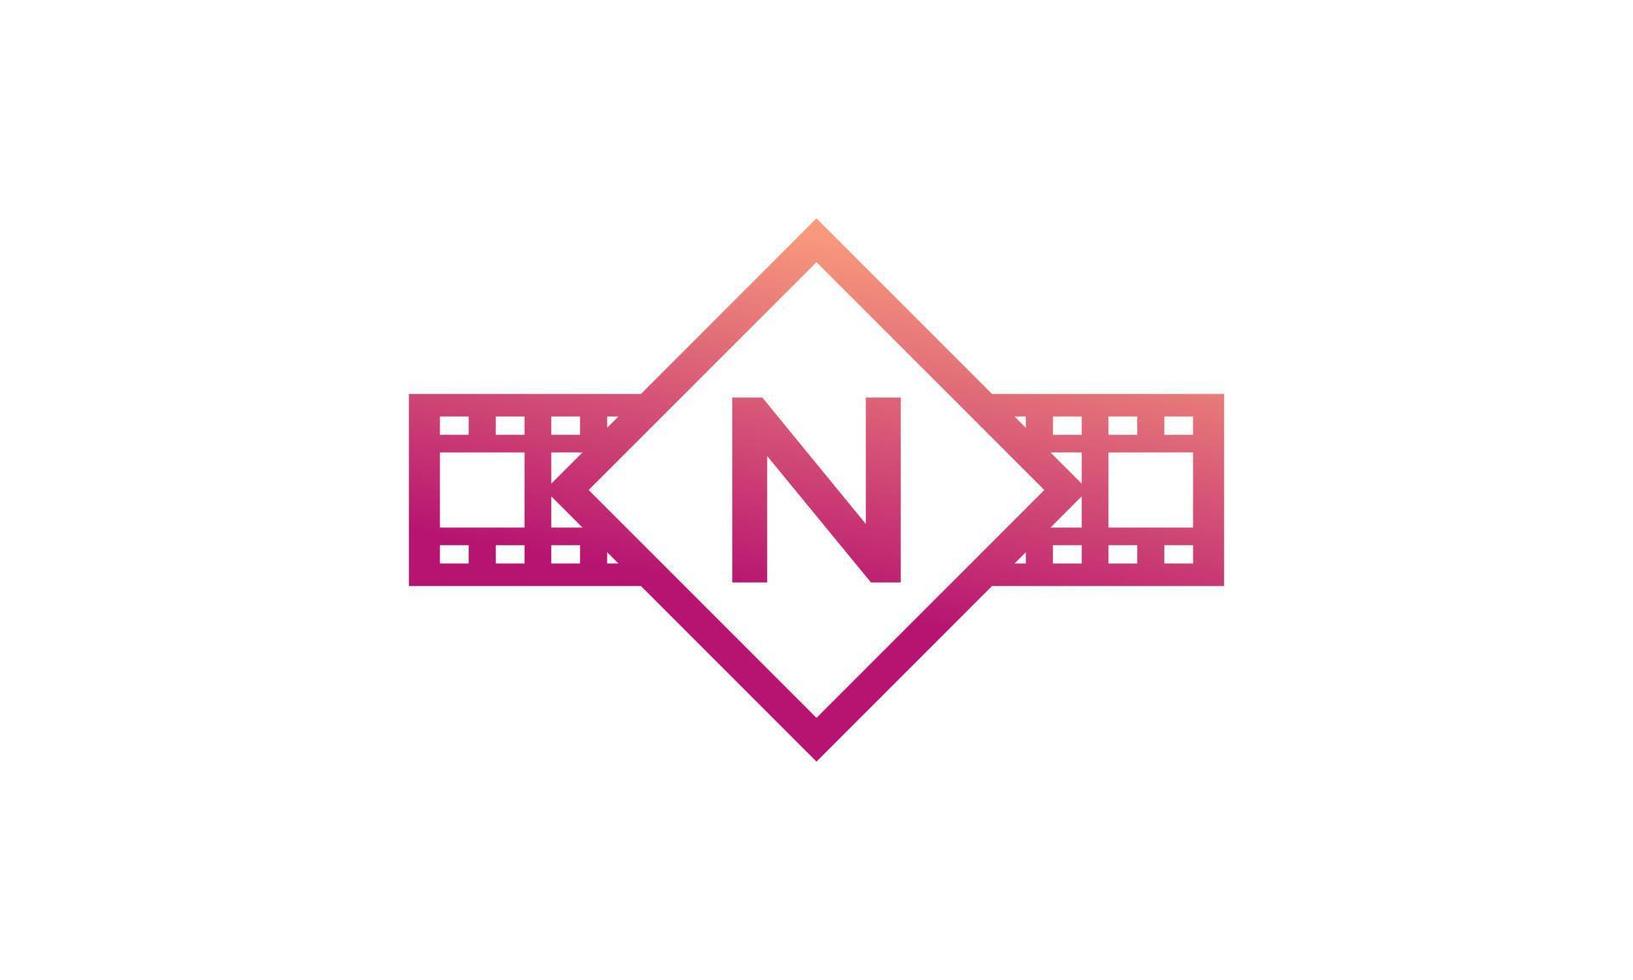 Initial Letter N Square with Reel Stripes Filmstrip for Film Movie Cinema Production Studio Logo Inspiration vector